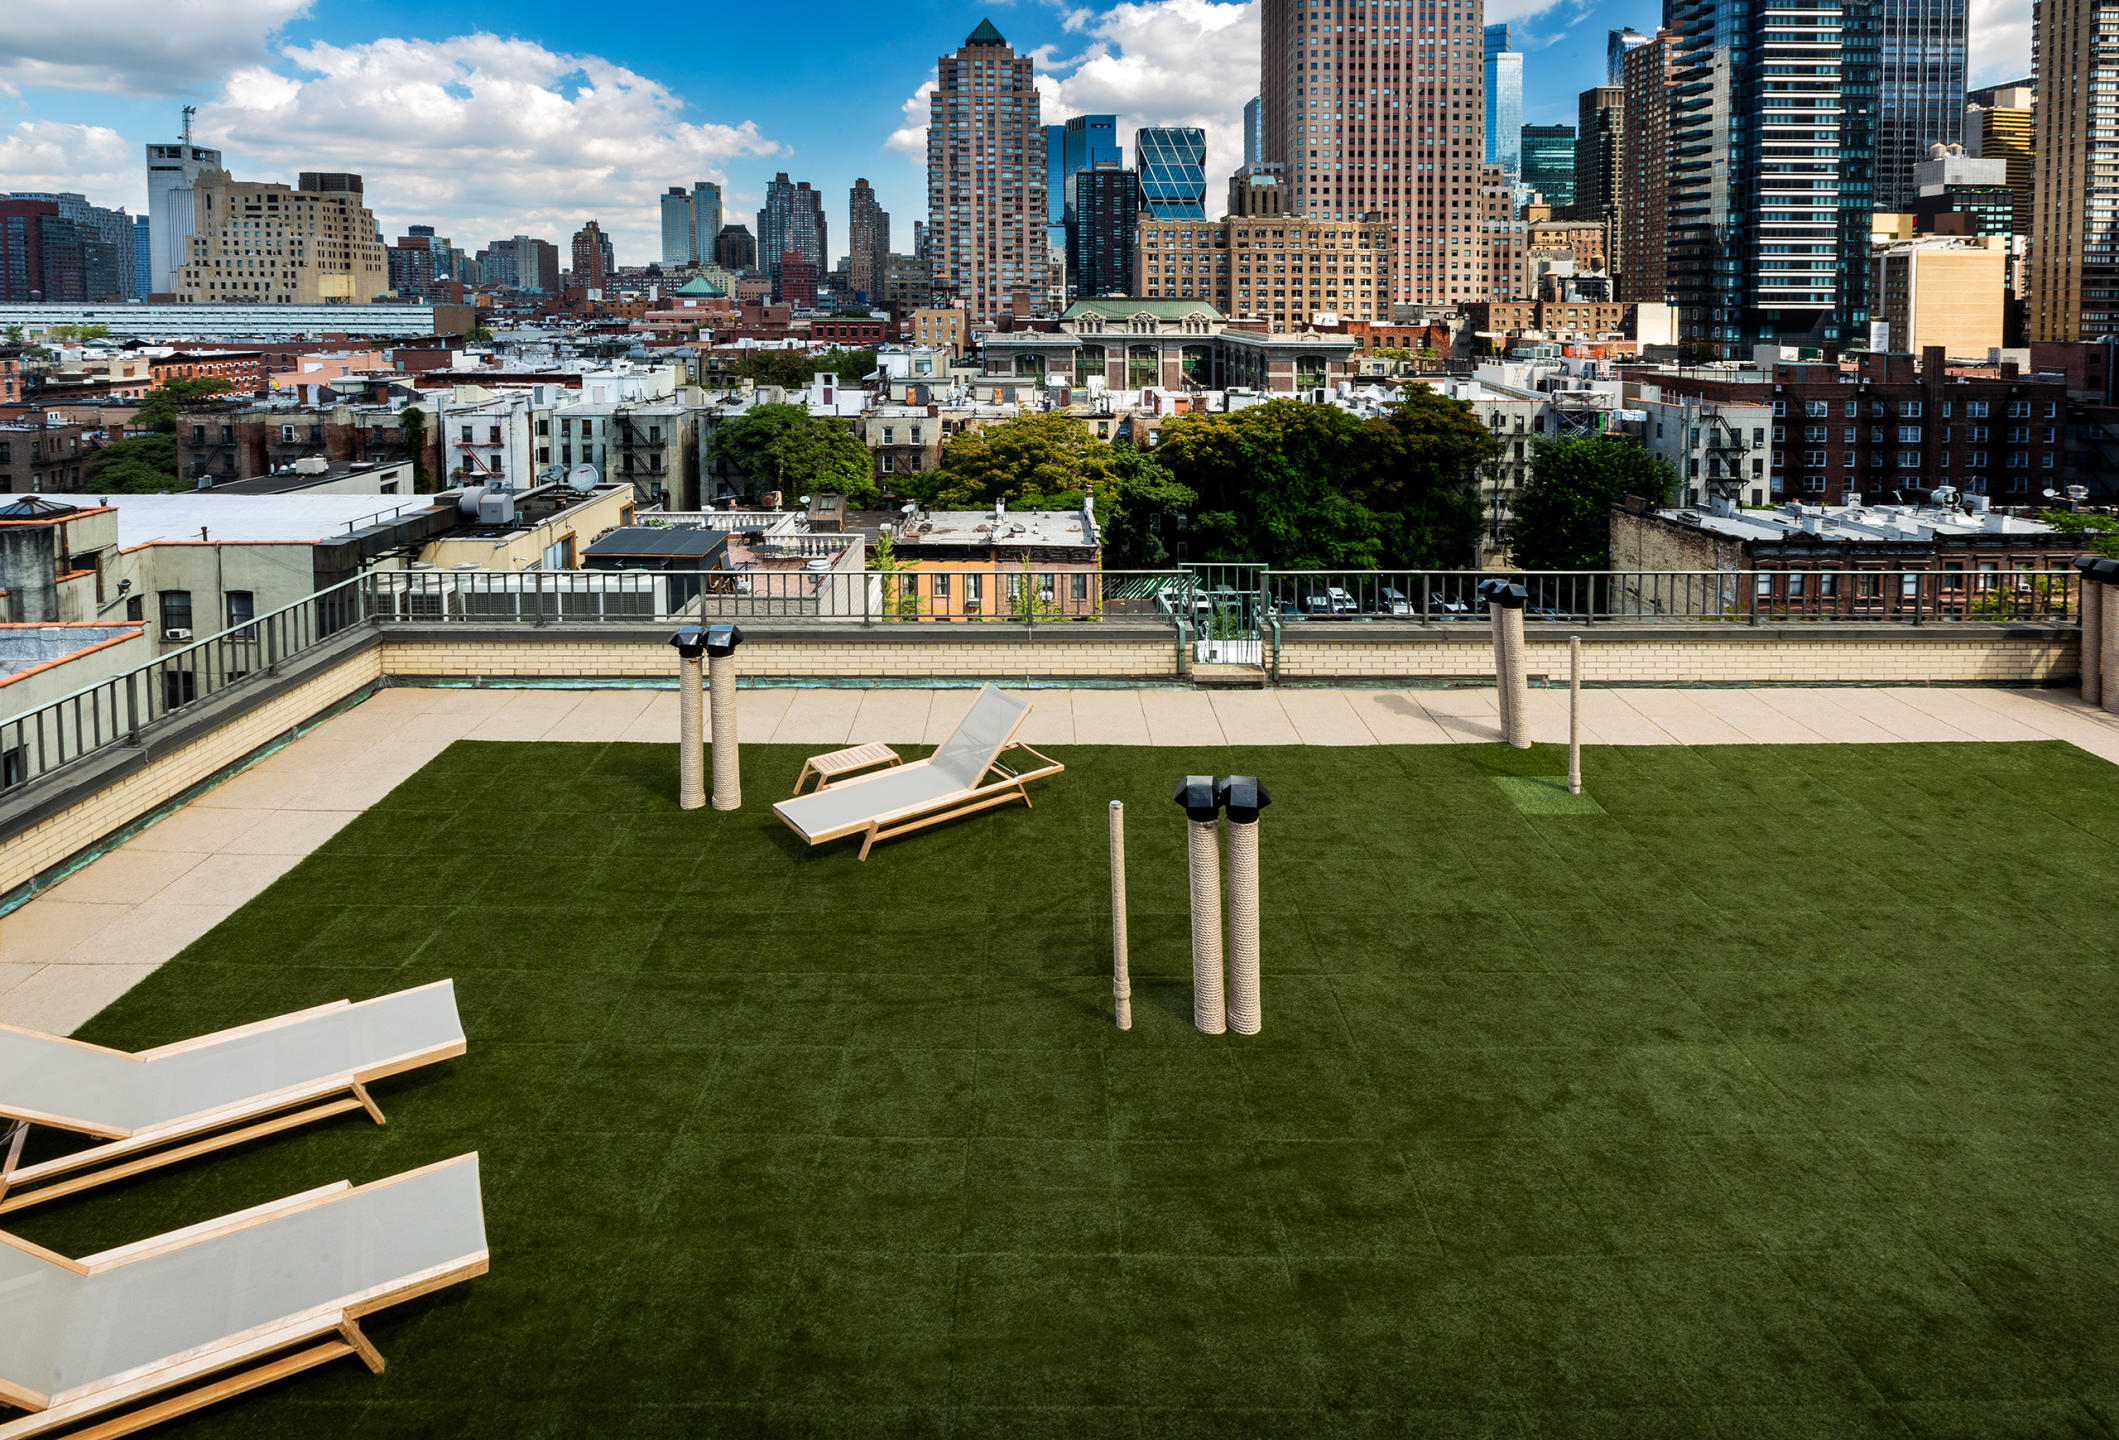 Ecore International Flooring - The Whitby  rooftop NYC : Miscellanous Projects : New York NY Architectural Photographer | Interior and Exterior